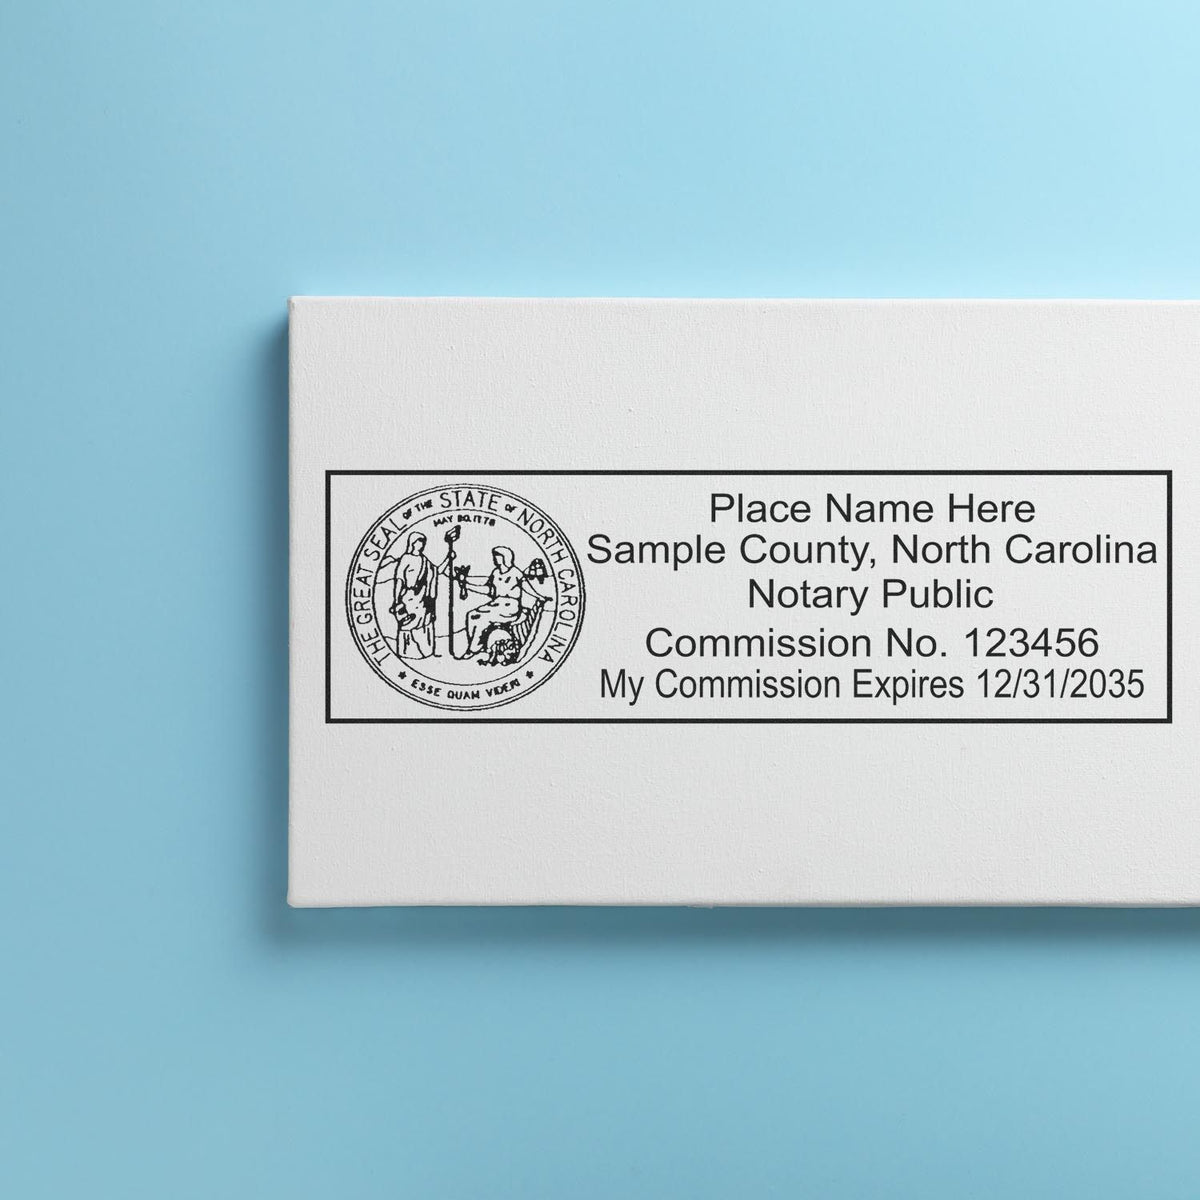 A lifestyle photo showing a stamped image of the MaxLight Premium Pre-Inked North Carolina State Seal Notarial Stamp on a piece of paper